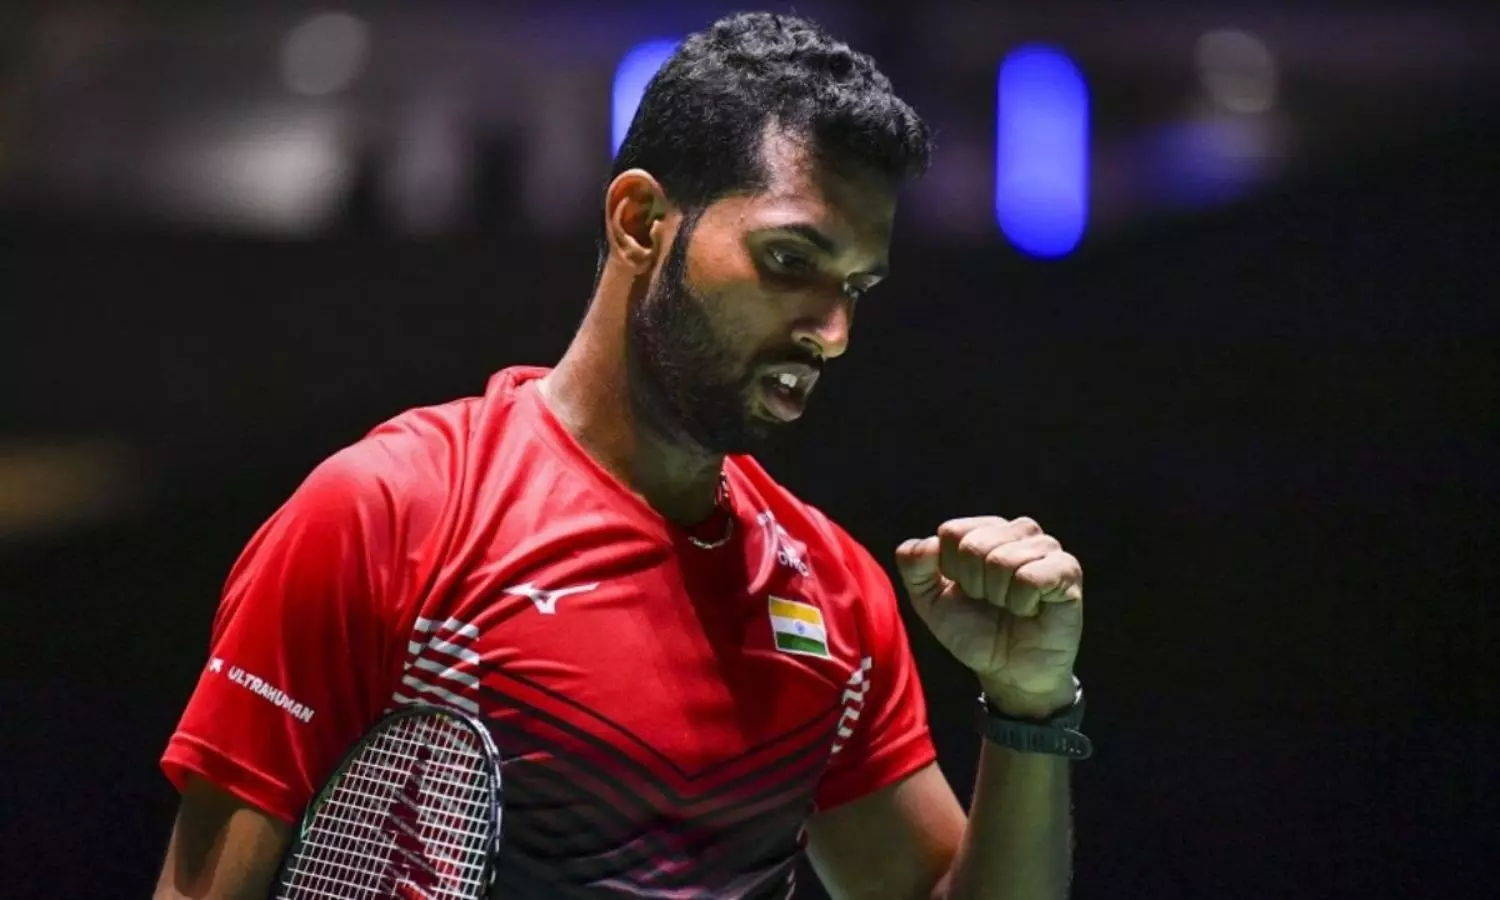 Asian Games Badminton LIVE HS Prannoy reaches semis; PV Sindhu knocked out 